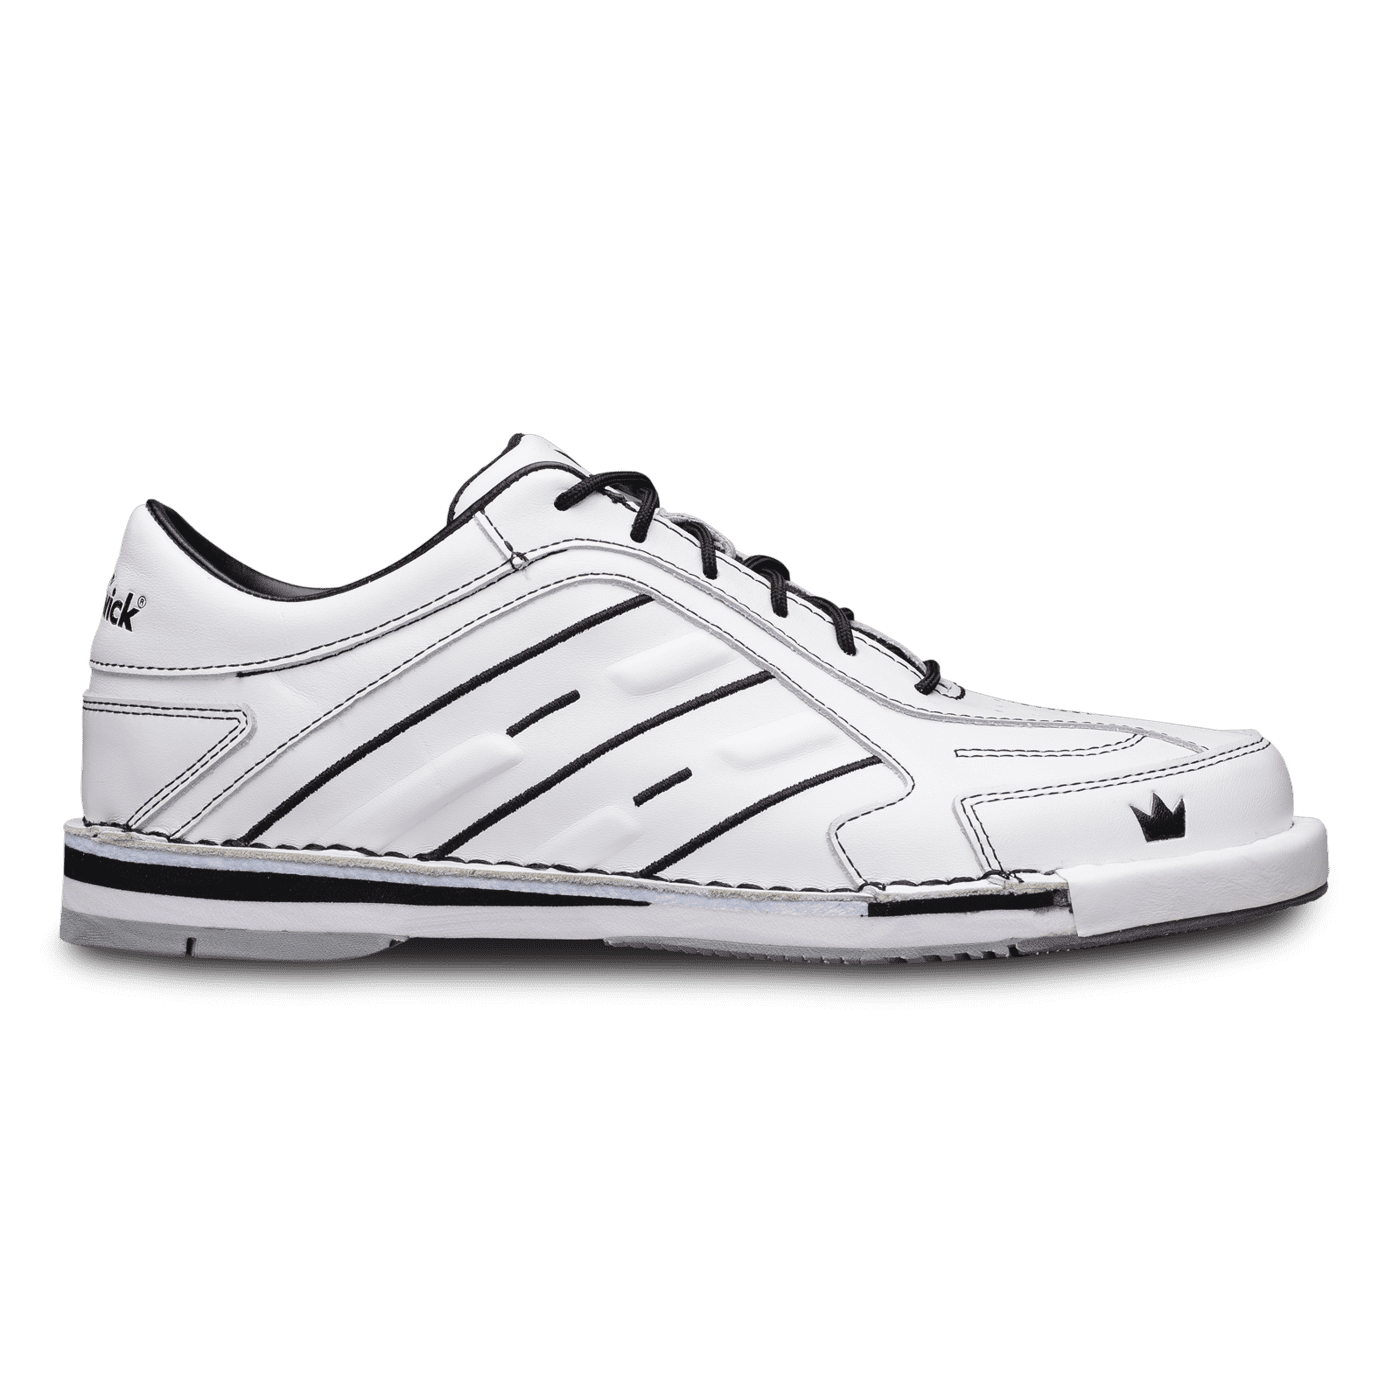 Brunswick Team Brunswick White Men's Right Handed Bowling Shoes Questions & Answers